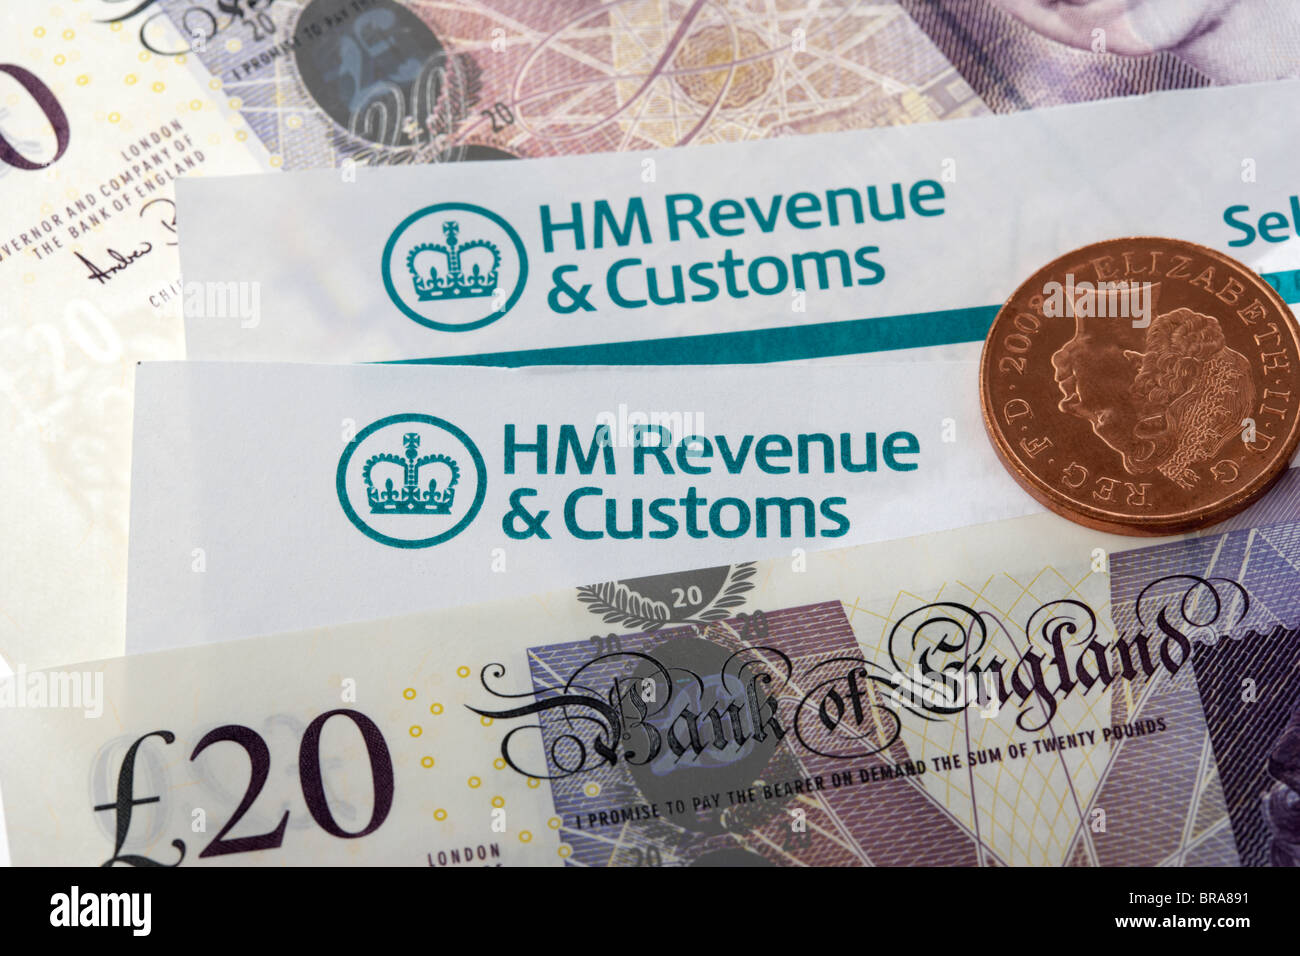 hmrc-tax-return-letters-with-logos-and-c